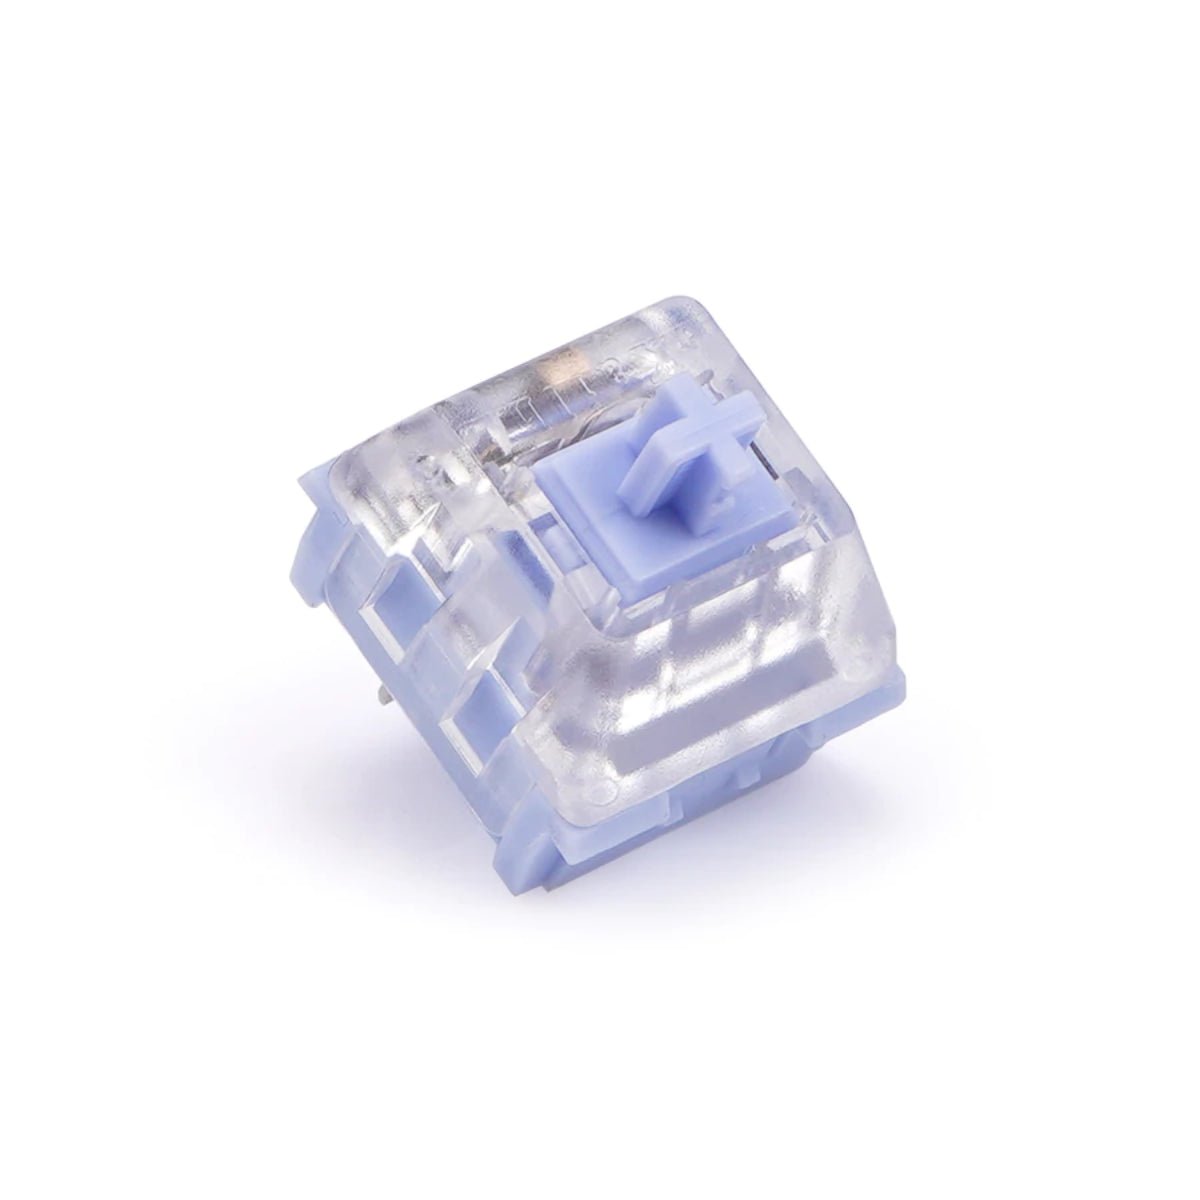 KBD Fans Kailh Tactile Switches - Polia - Store 974 | ستور ٩٧٤